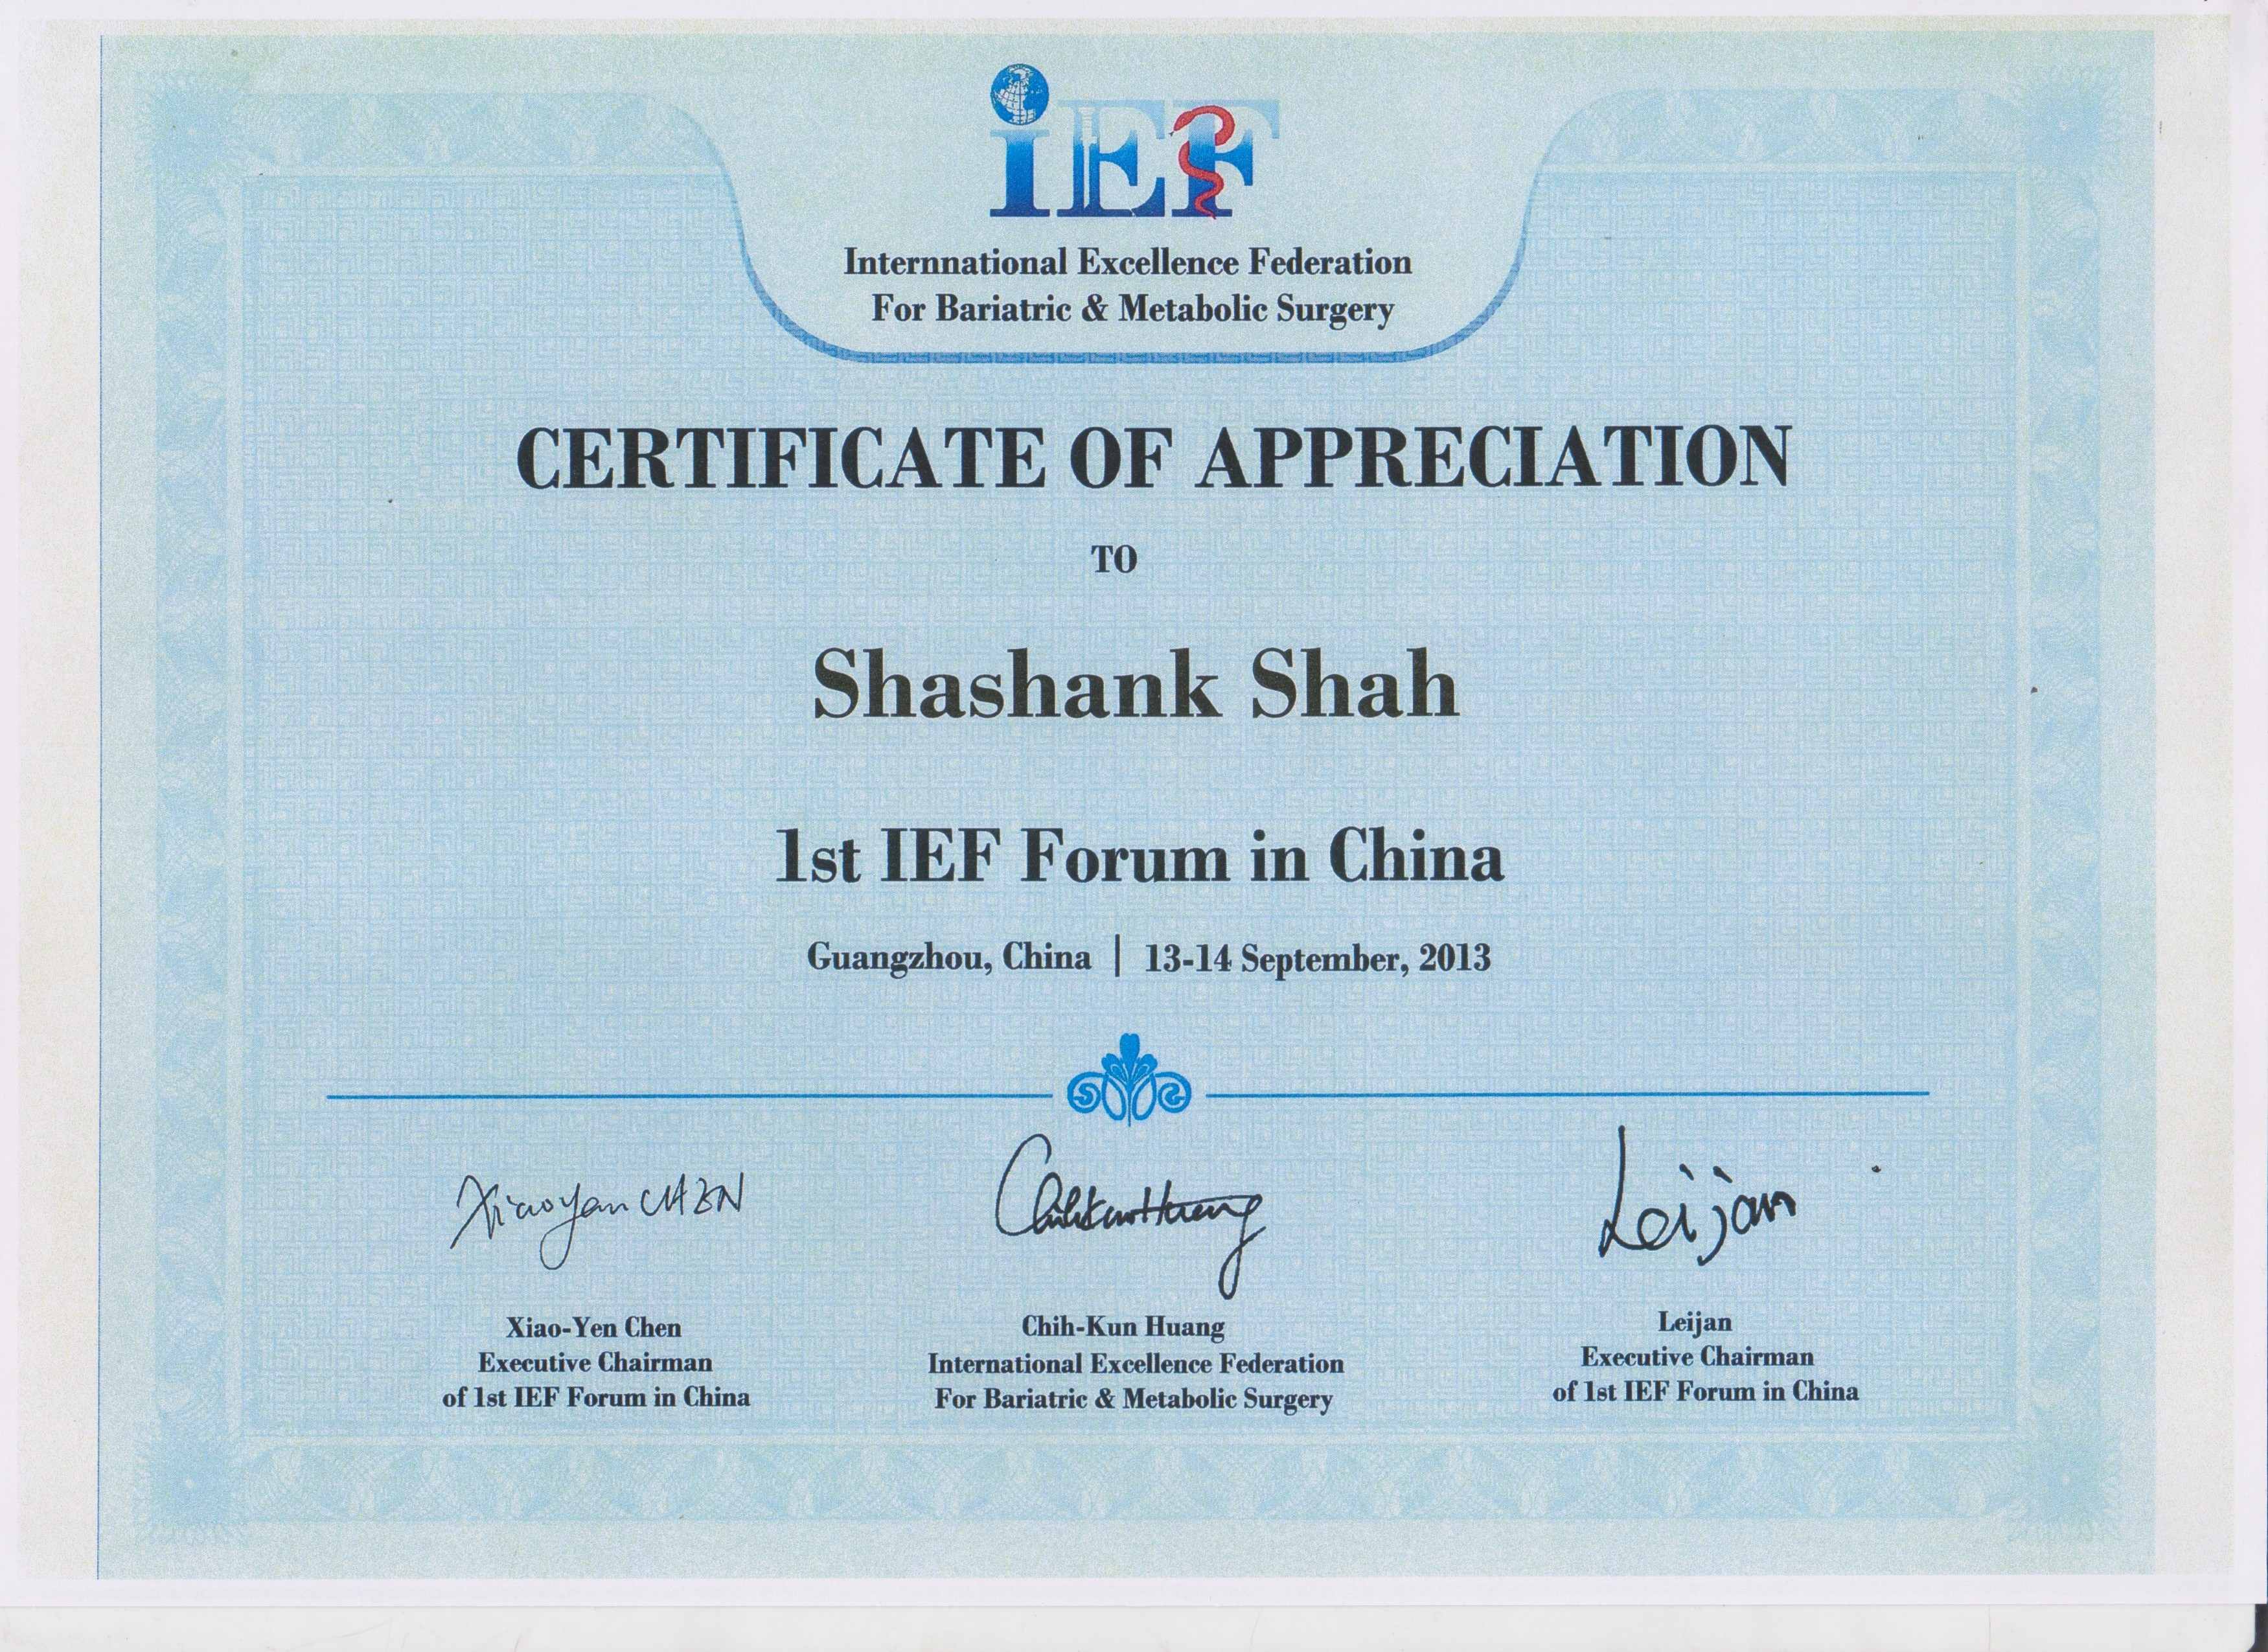 Dr Shashank Shah was a part of the first International Excellence Federation (IEF) held in China in 2013. 